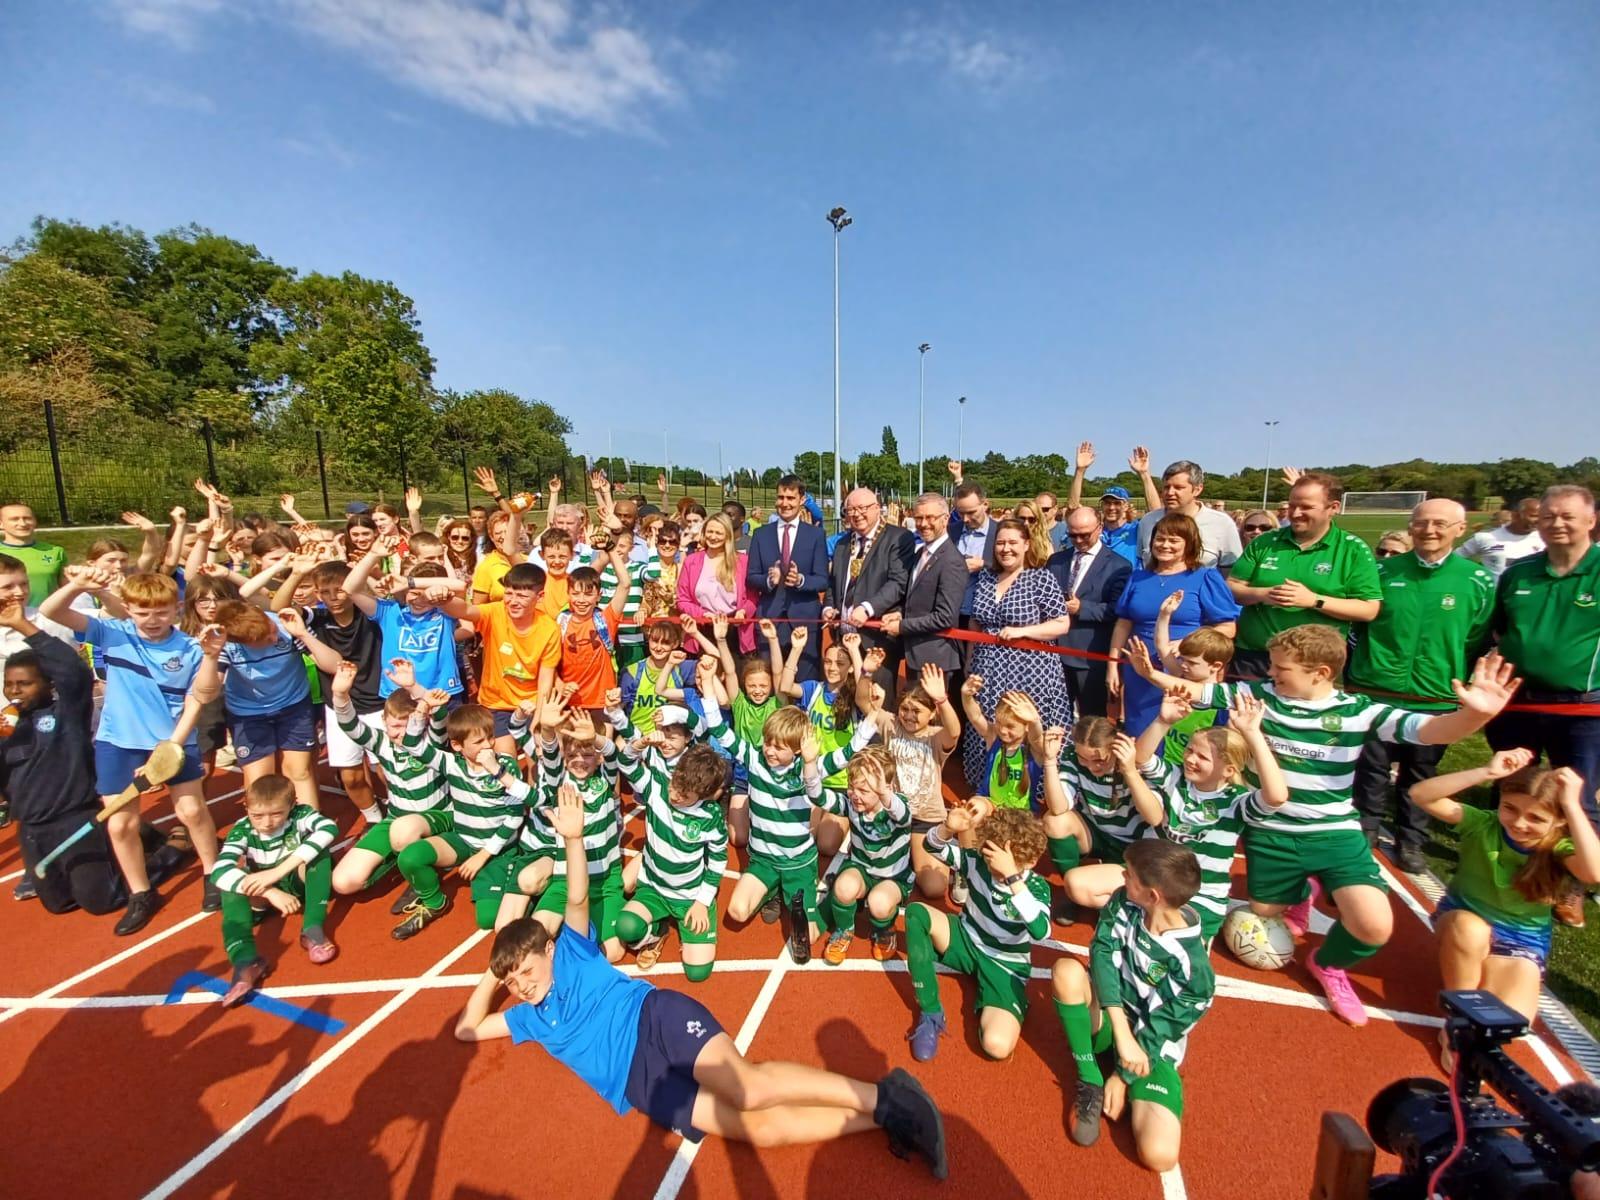 The new Porterstown sports hub has been opened